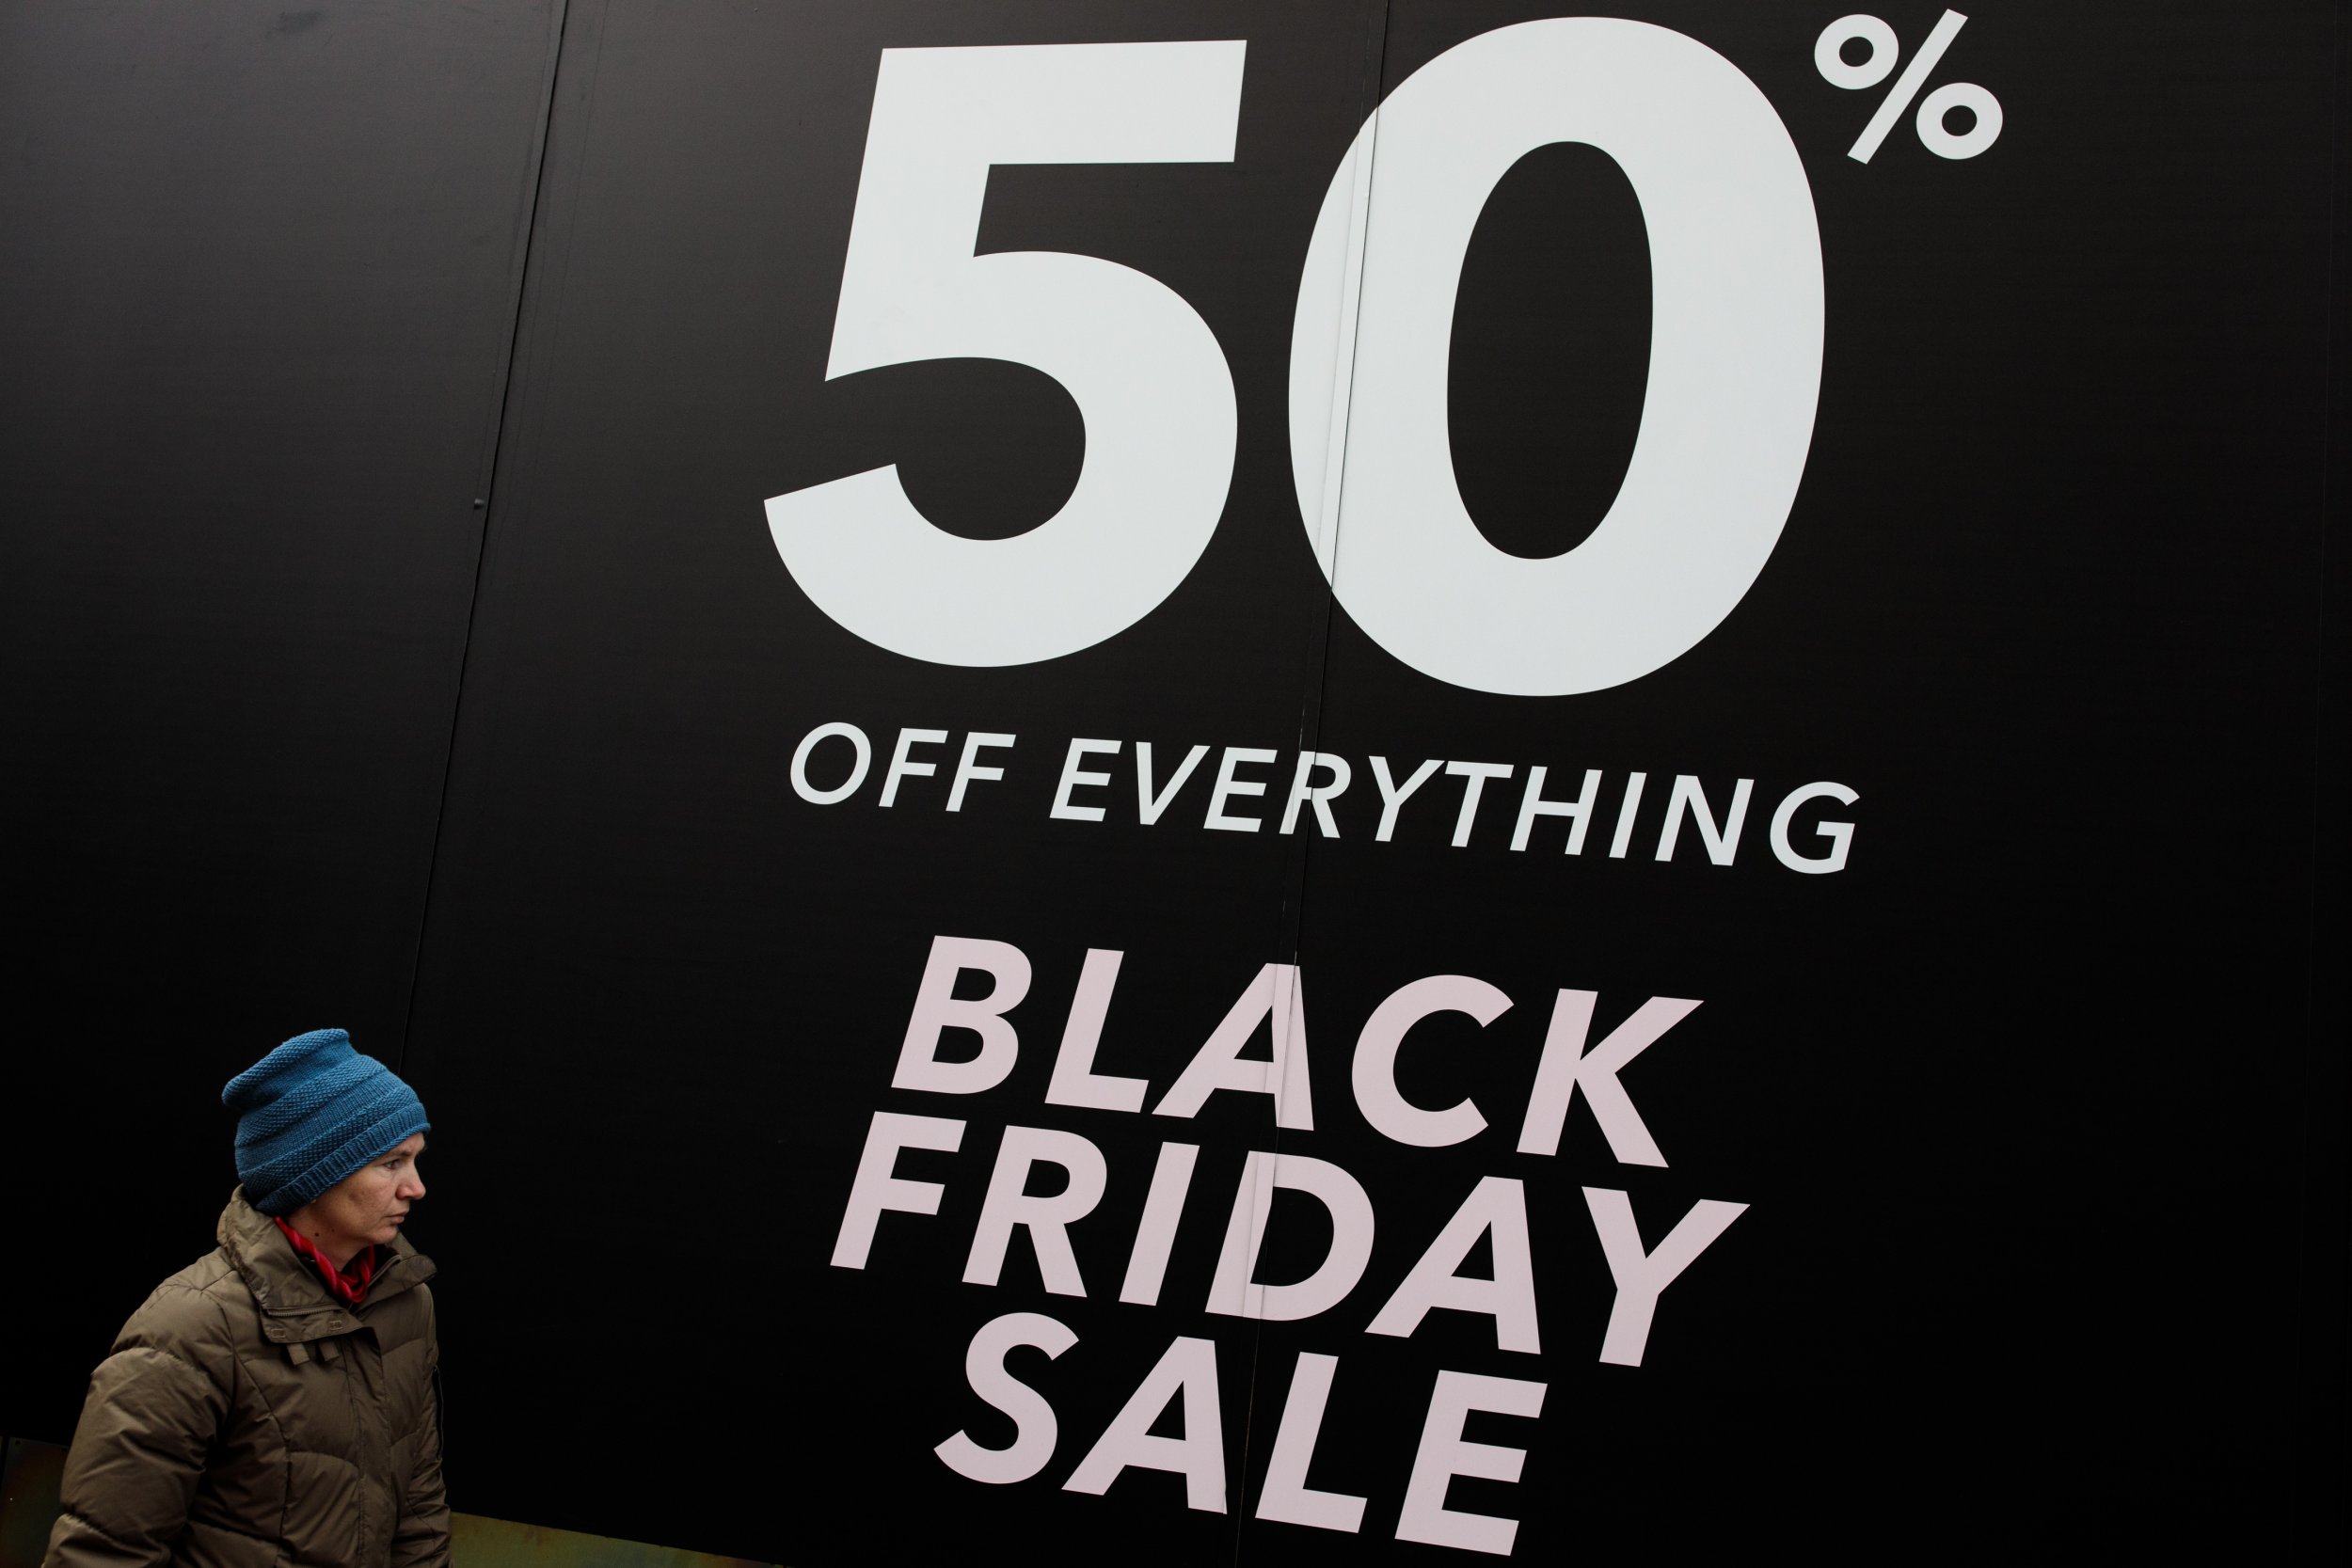 Why Is It Called Black Friday, Cyber Monday? When Are They in 2018? - Why Is Black Friday A Big Deal